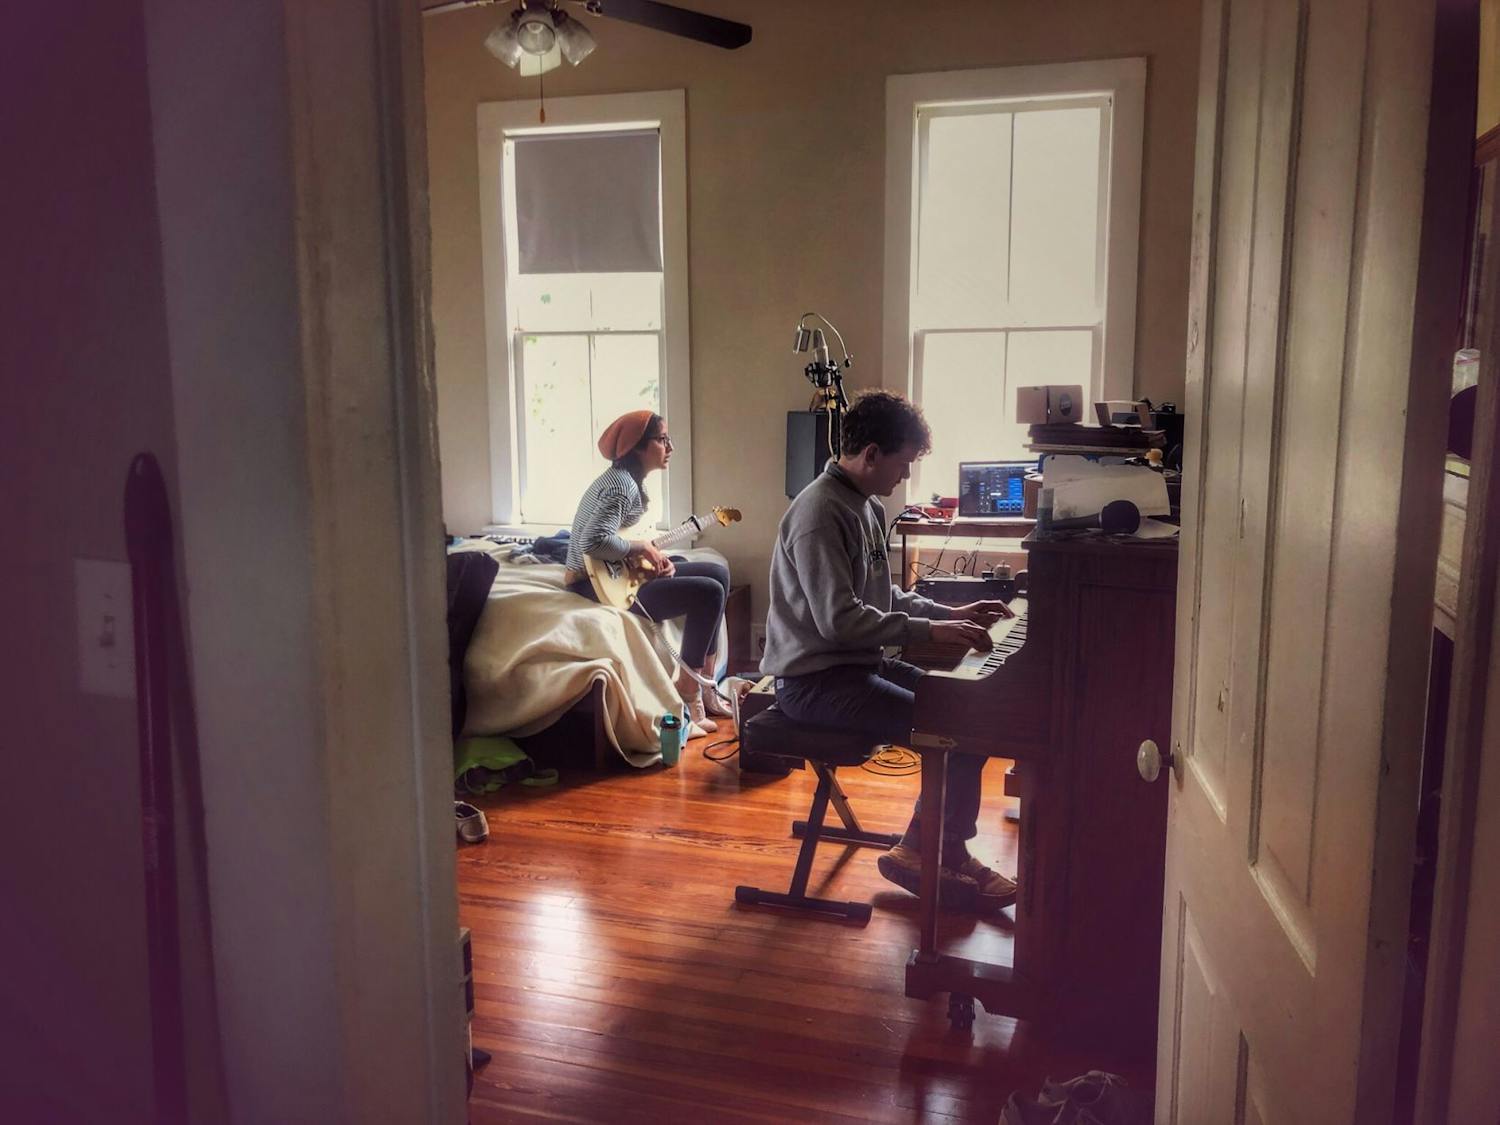 Deitz (left) and her partner during the recording process of "Temporary Clouds".